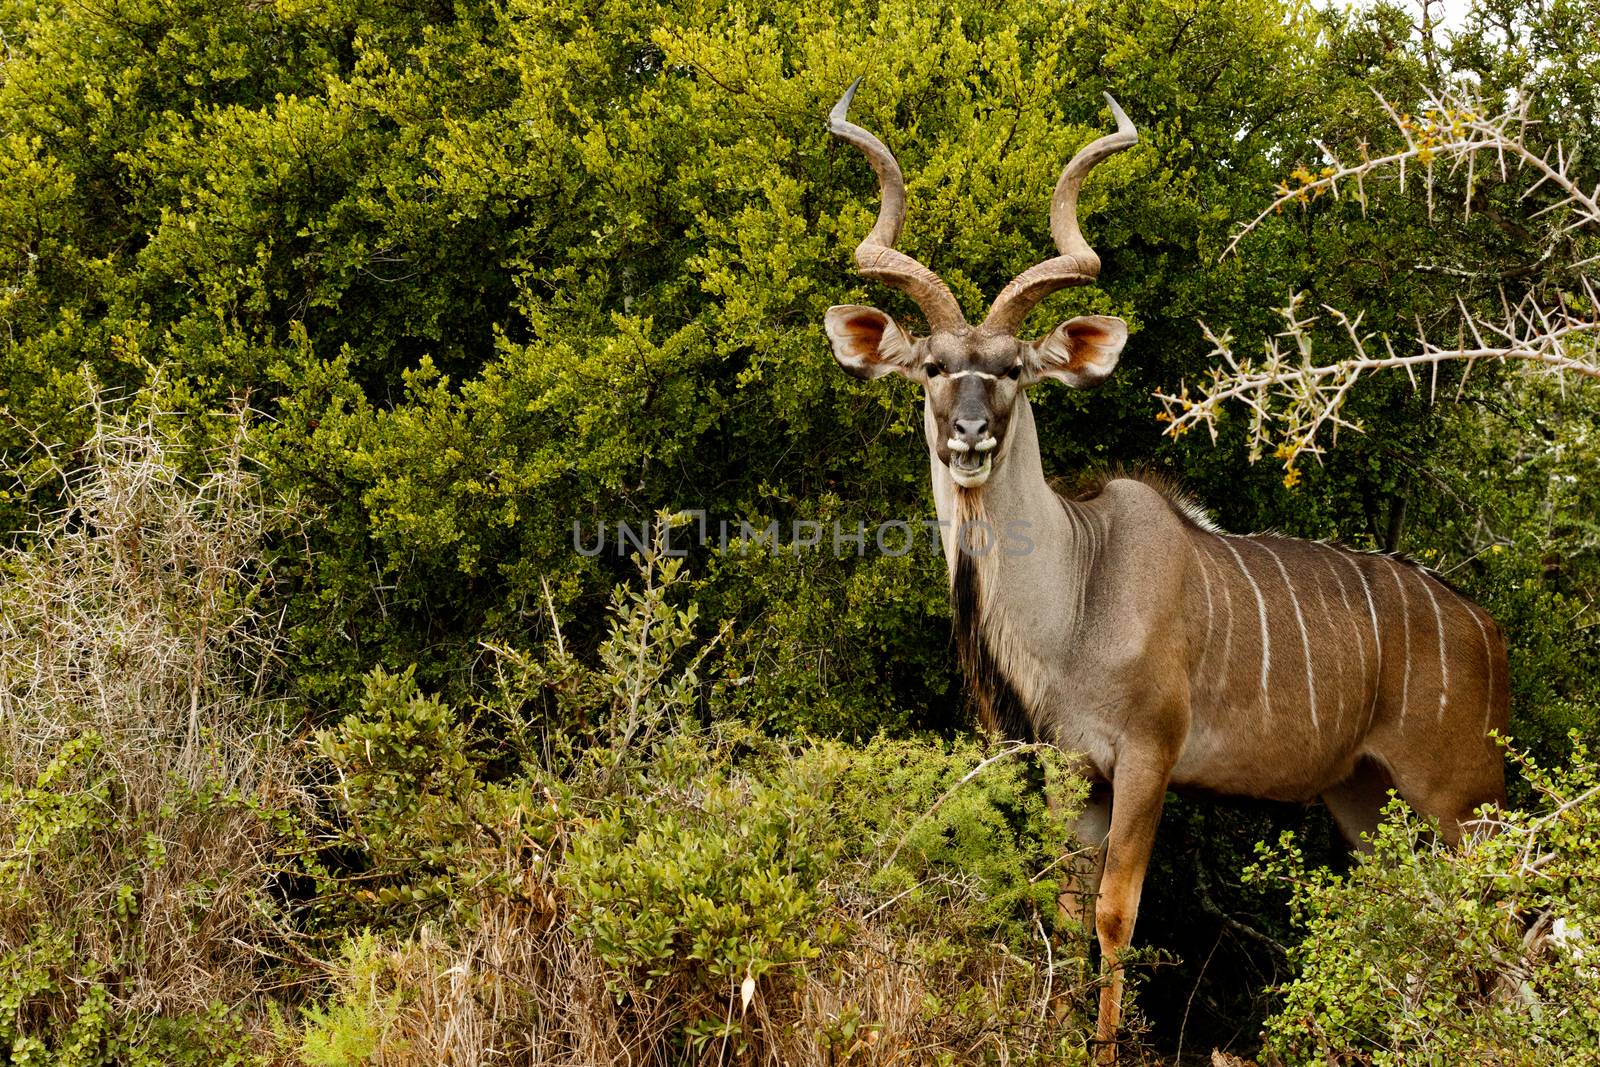 Greater Kudu standing and smiling in the bushes.